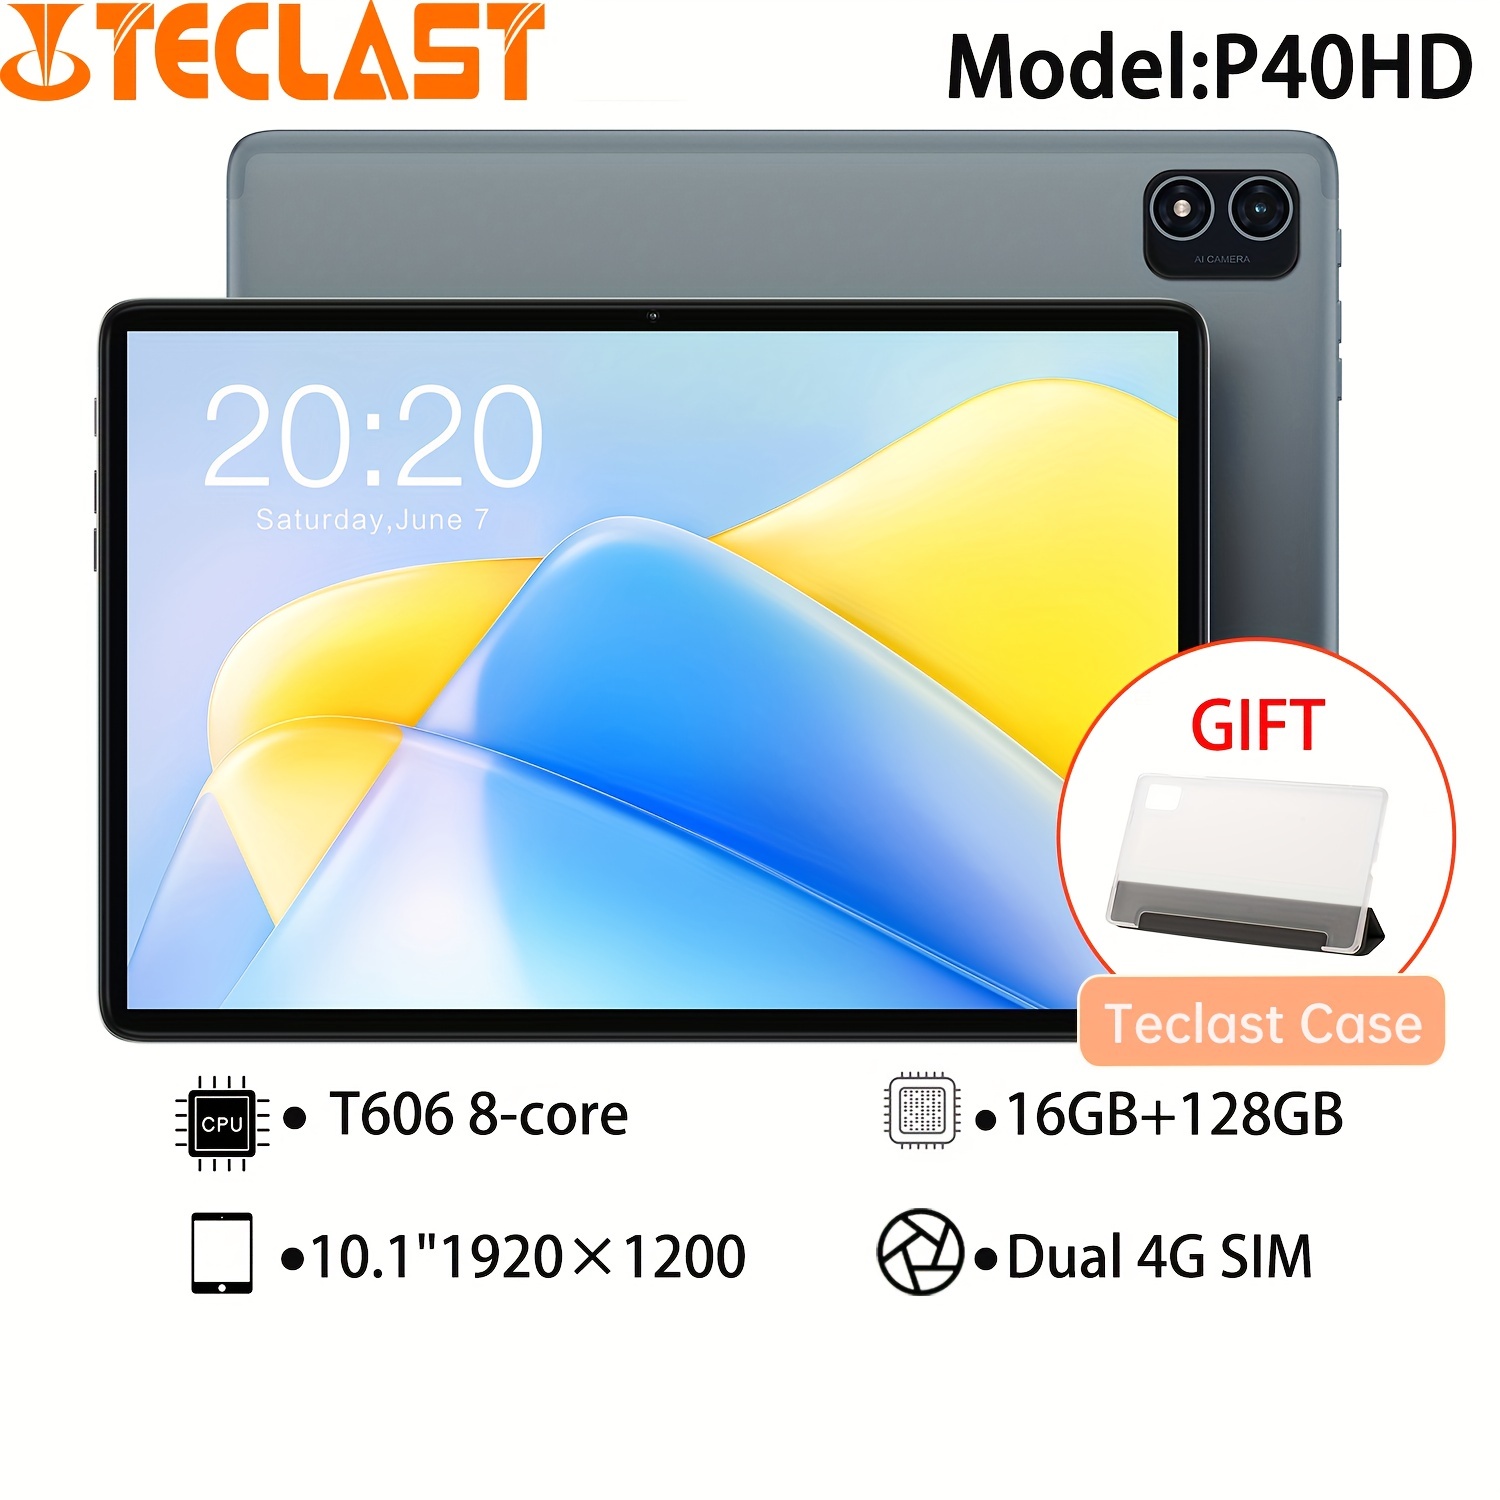 Teclast P40hd Tablet Ips Screen 8gb 128gb Rom 1tb Expand Android